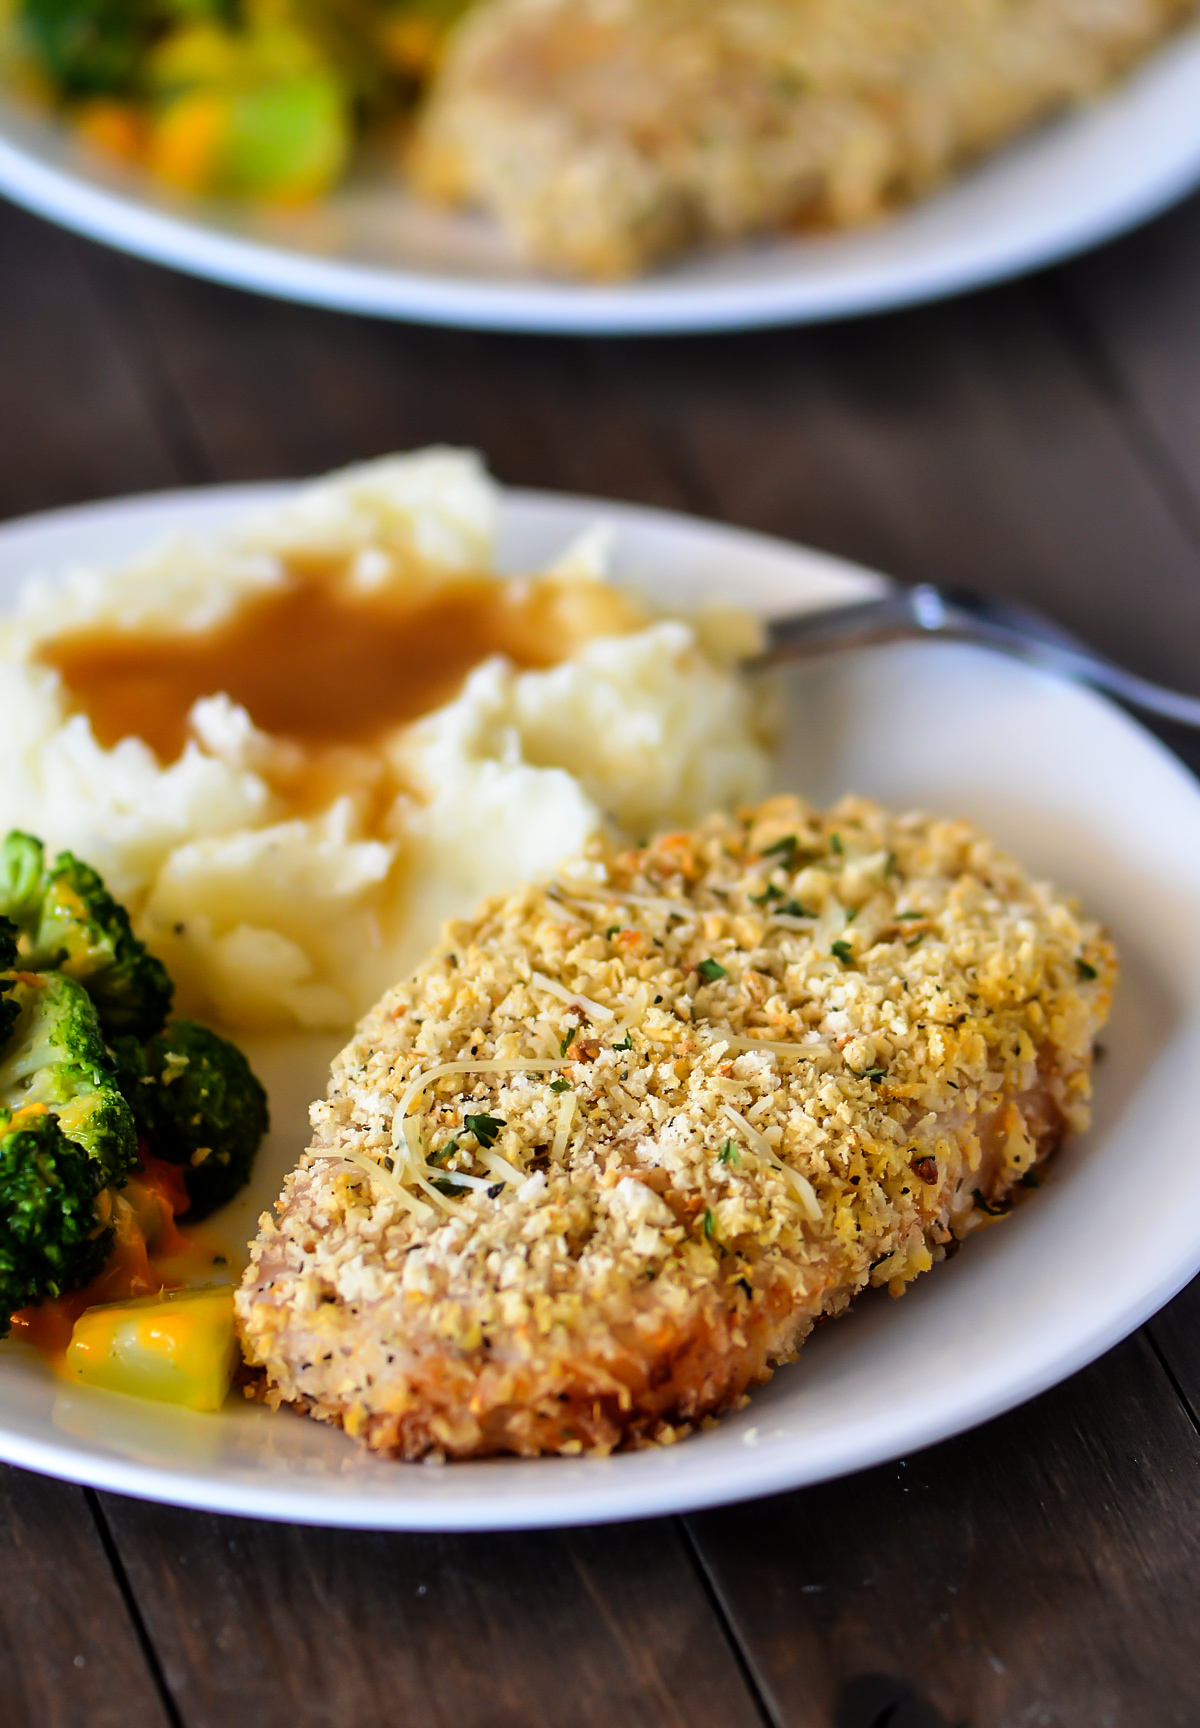 Baked Parmesan Pork Chops are tender, seasoned pork chops with a crispy outside crust. Life-in-the-Lofthouse.com